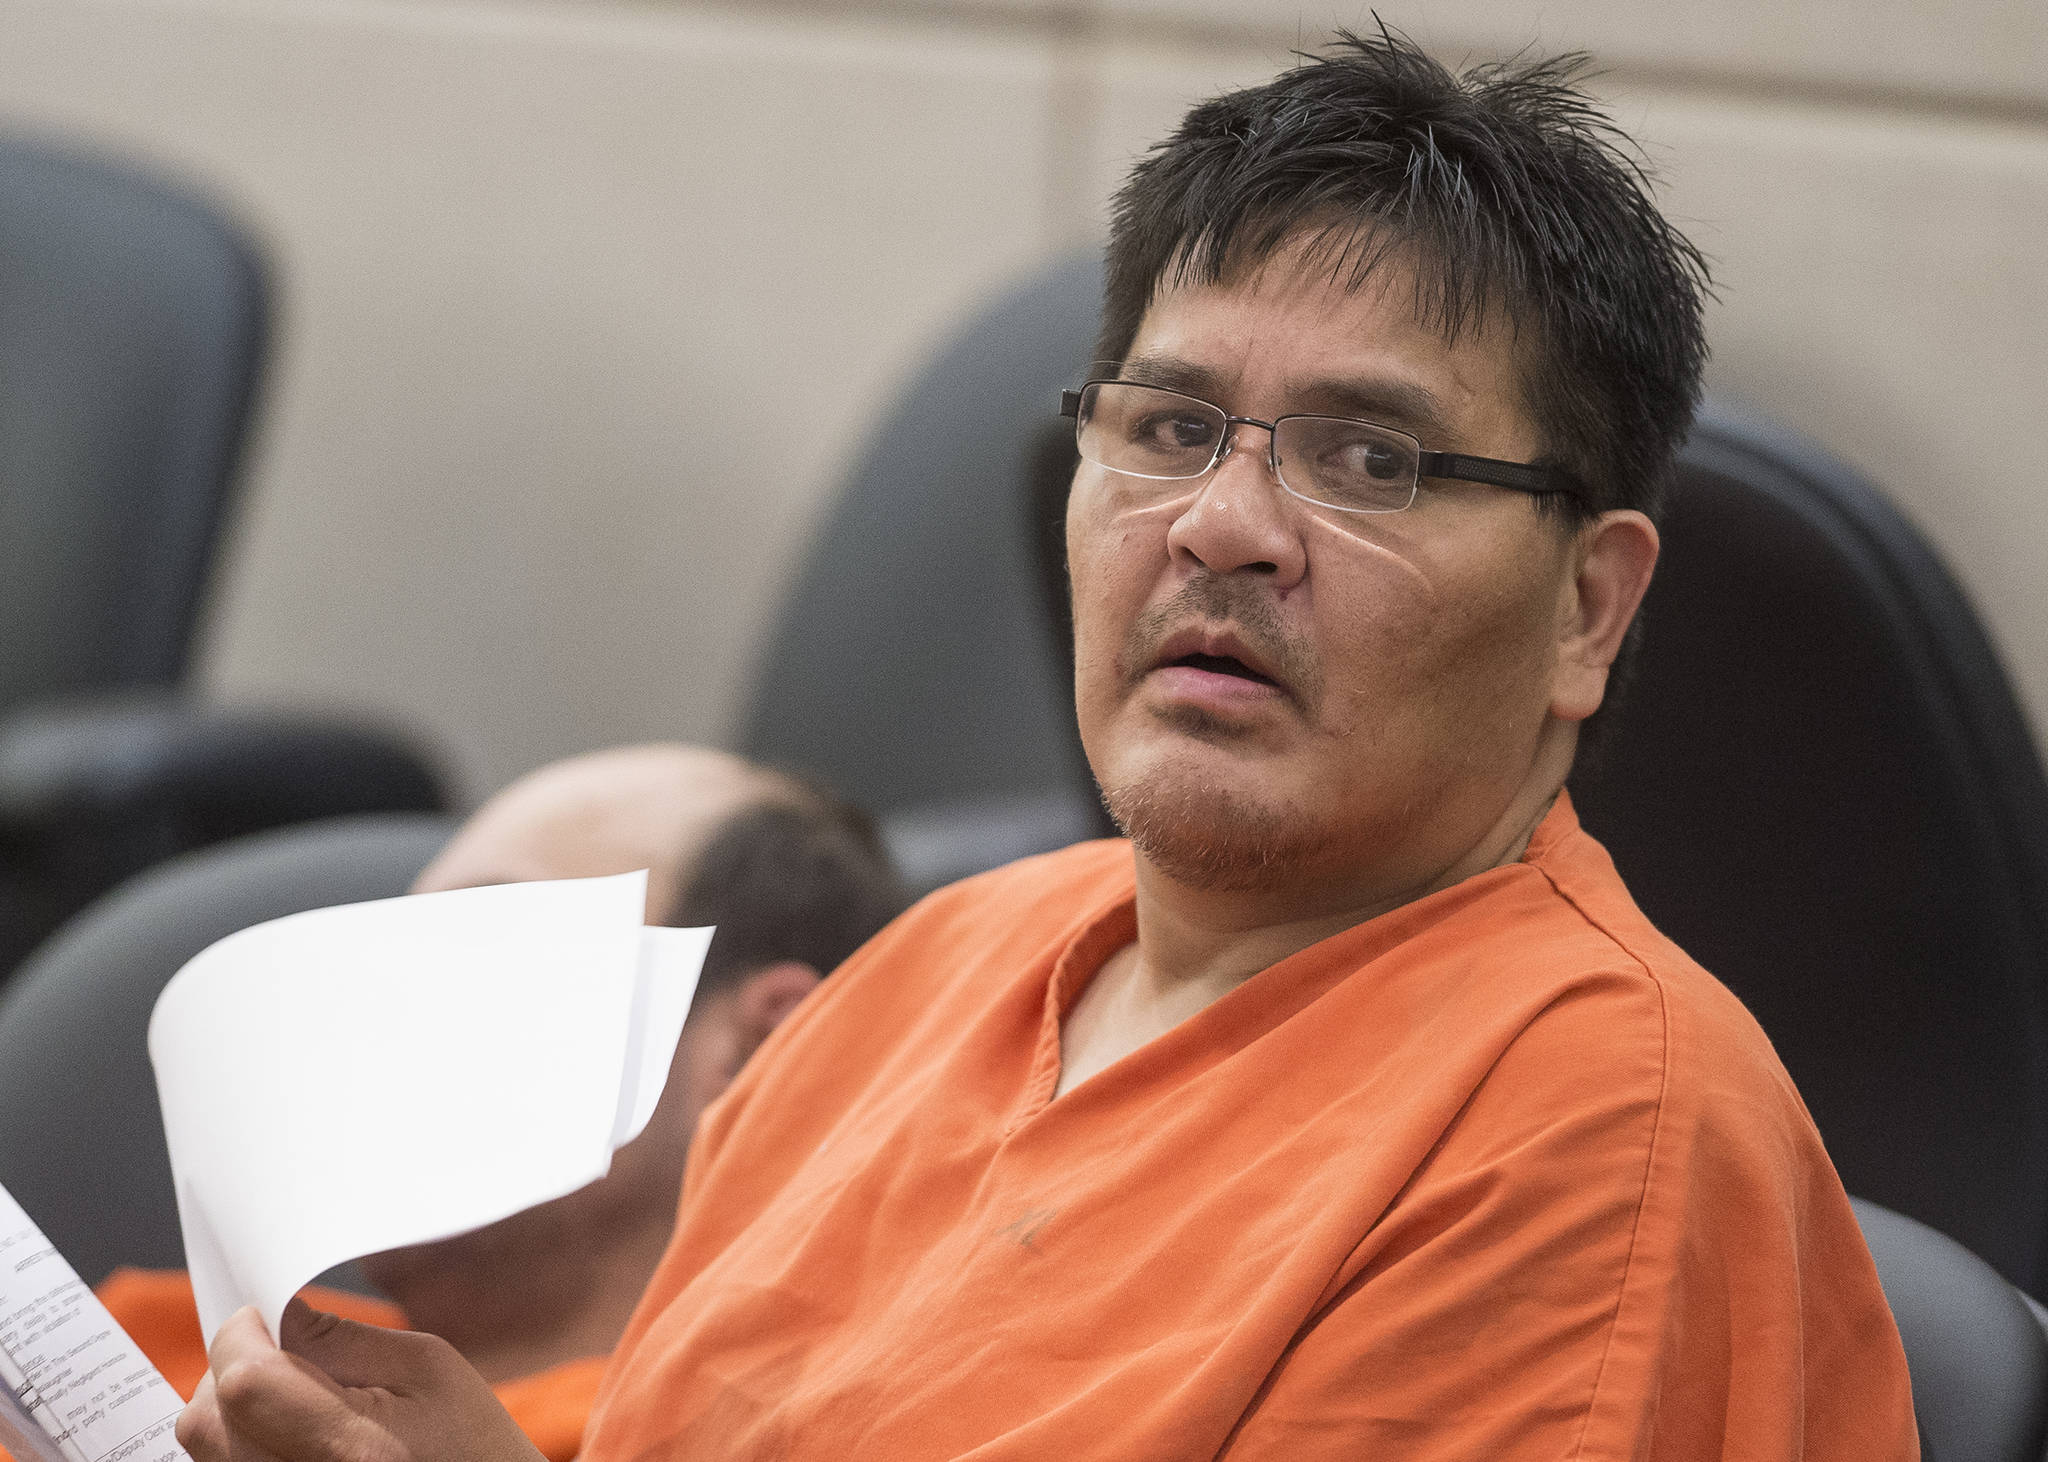 David Valentine Evenson, 51, appears in Juneau District Court on charges of second-degree murder, manslaughter and criminally negligent homicide of Aaron G. Monette. (Michael Penn | Juneau Empire)